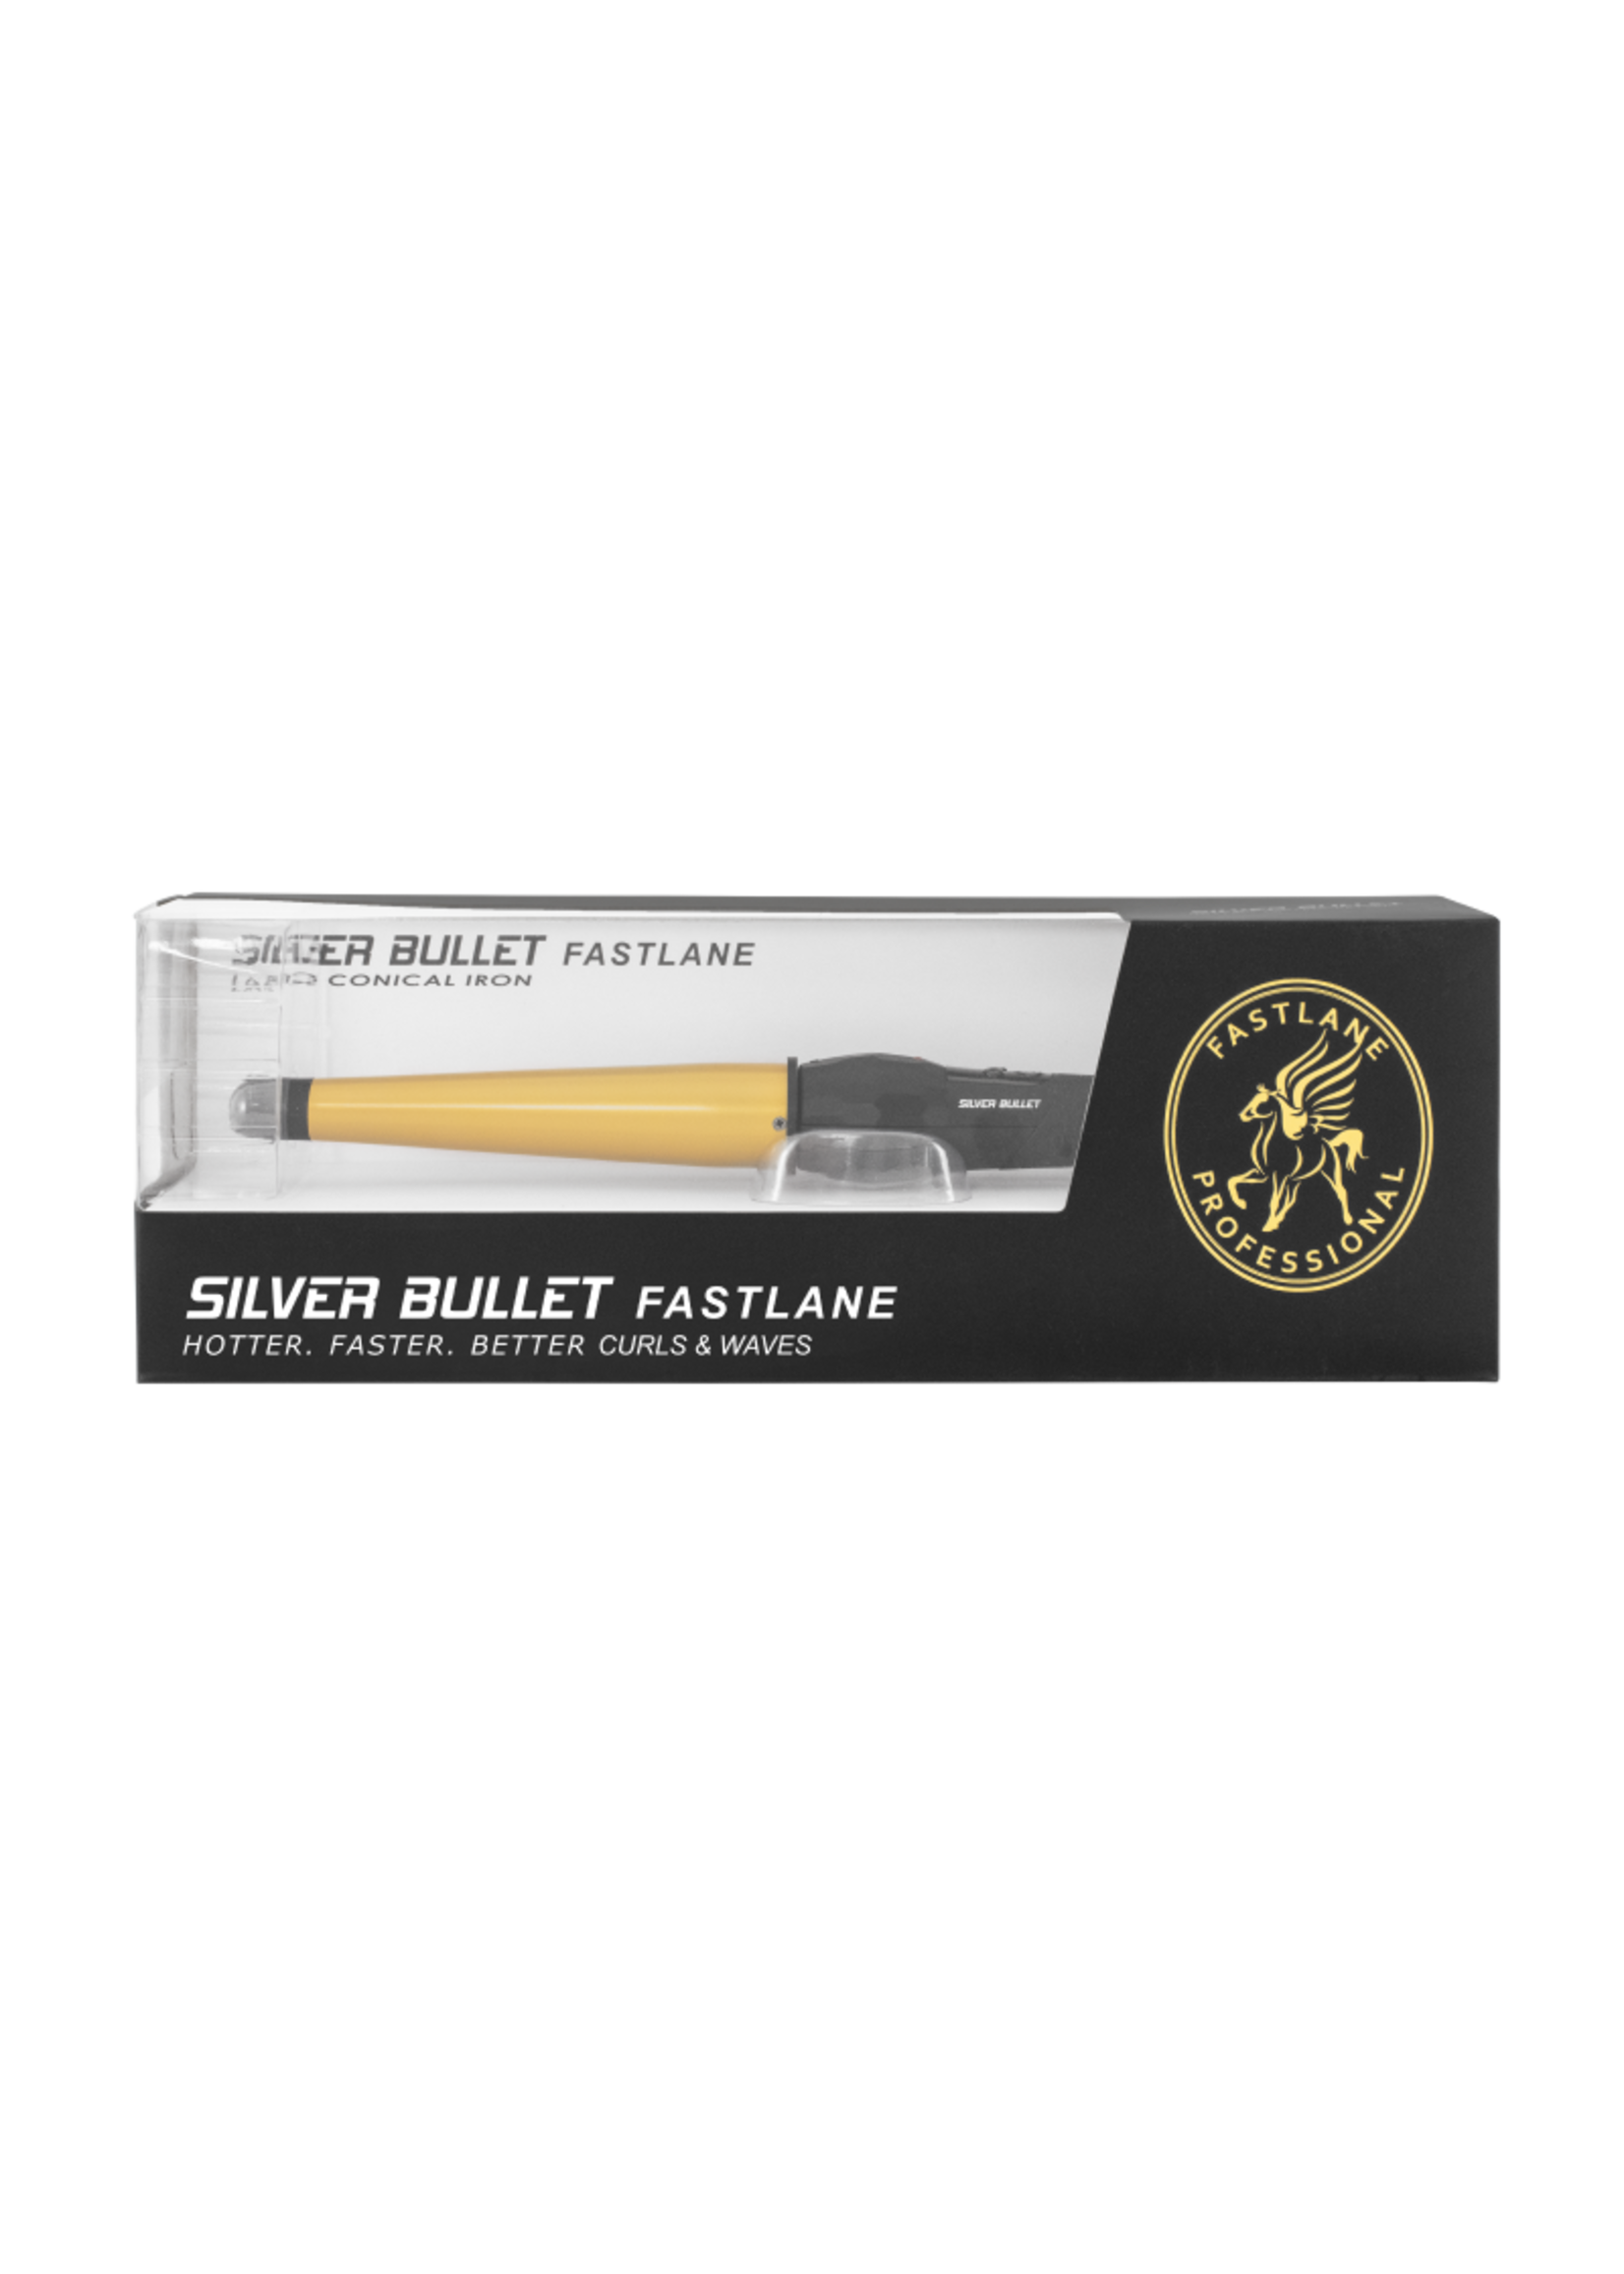 Silver Bullet Silver Bullet Fastlane Ceramic Conical Wand Gold - 19mm - 32mm Large